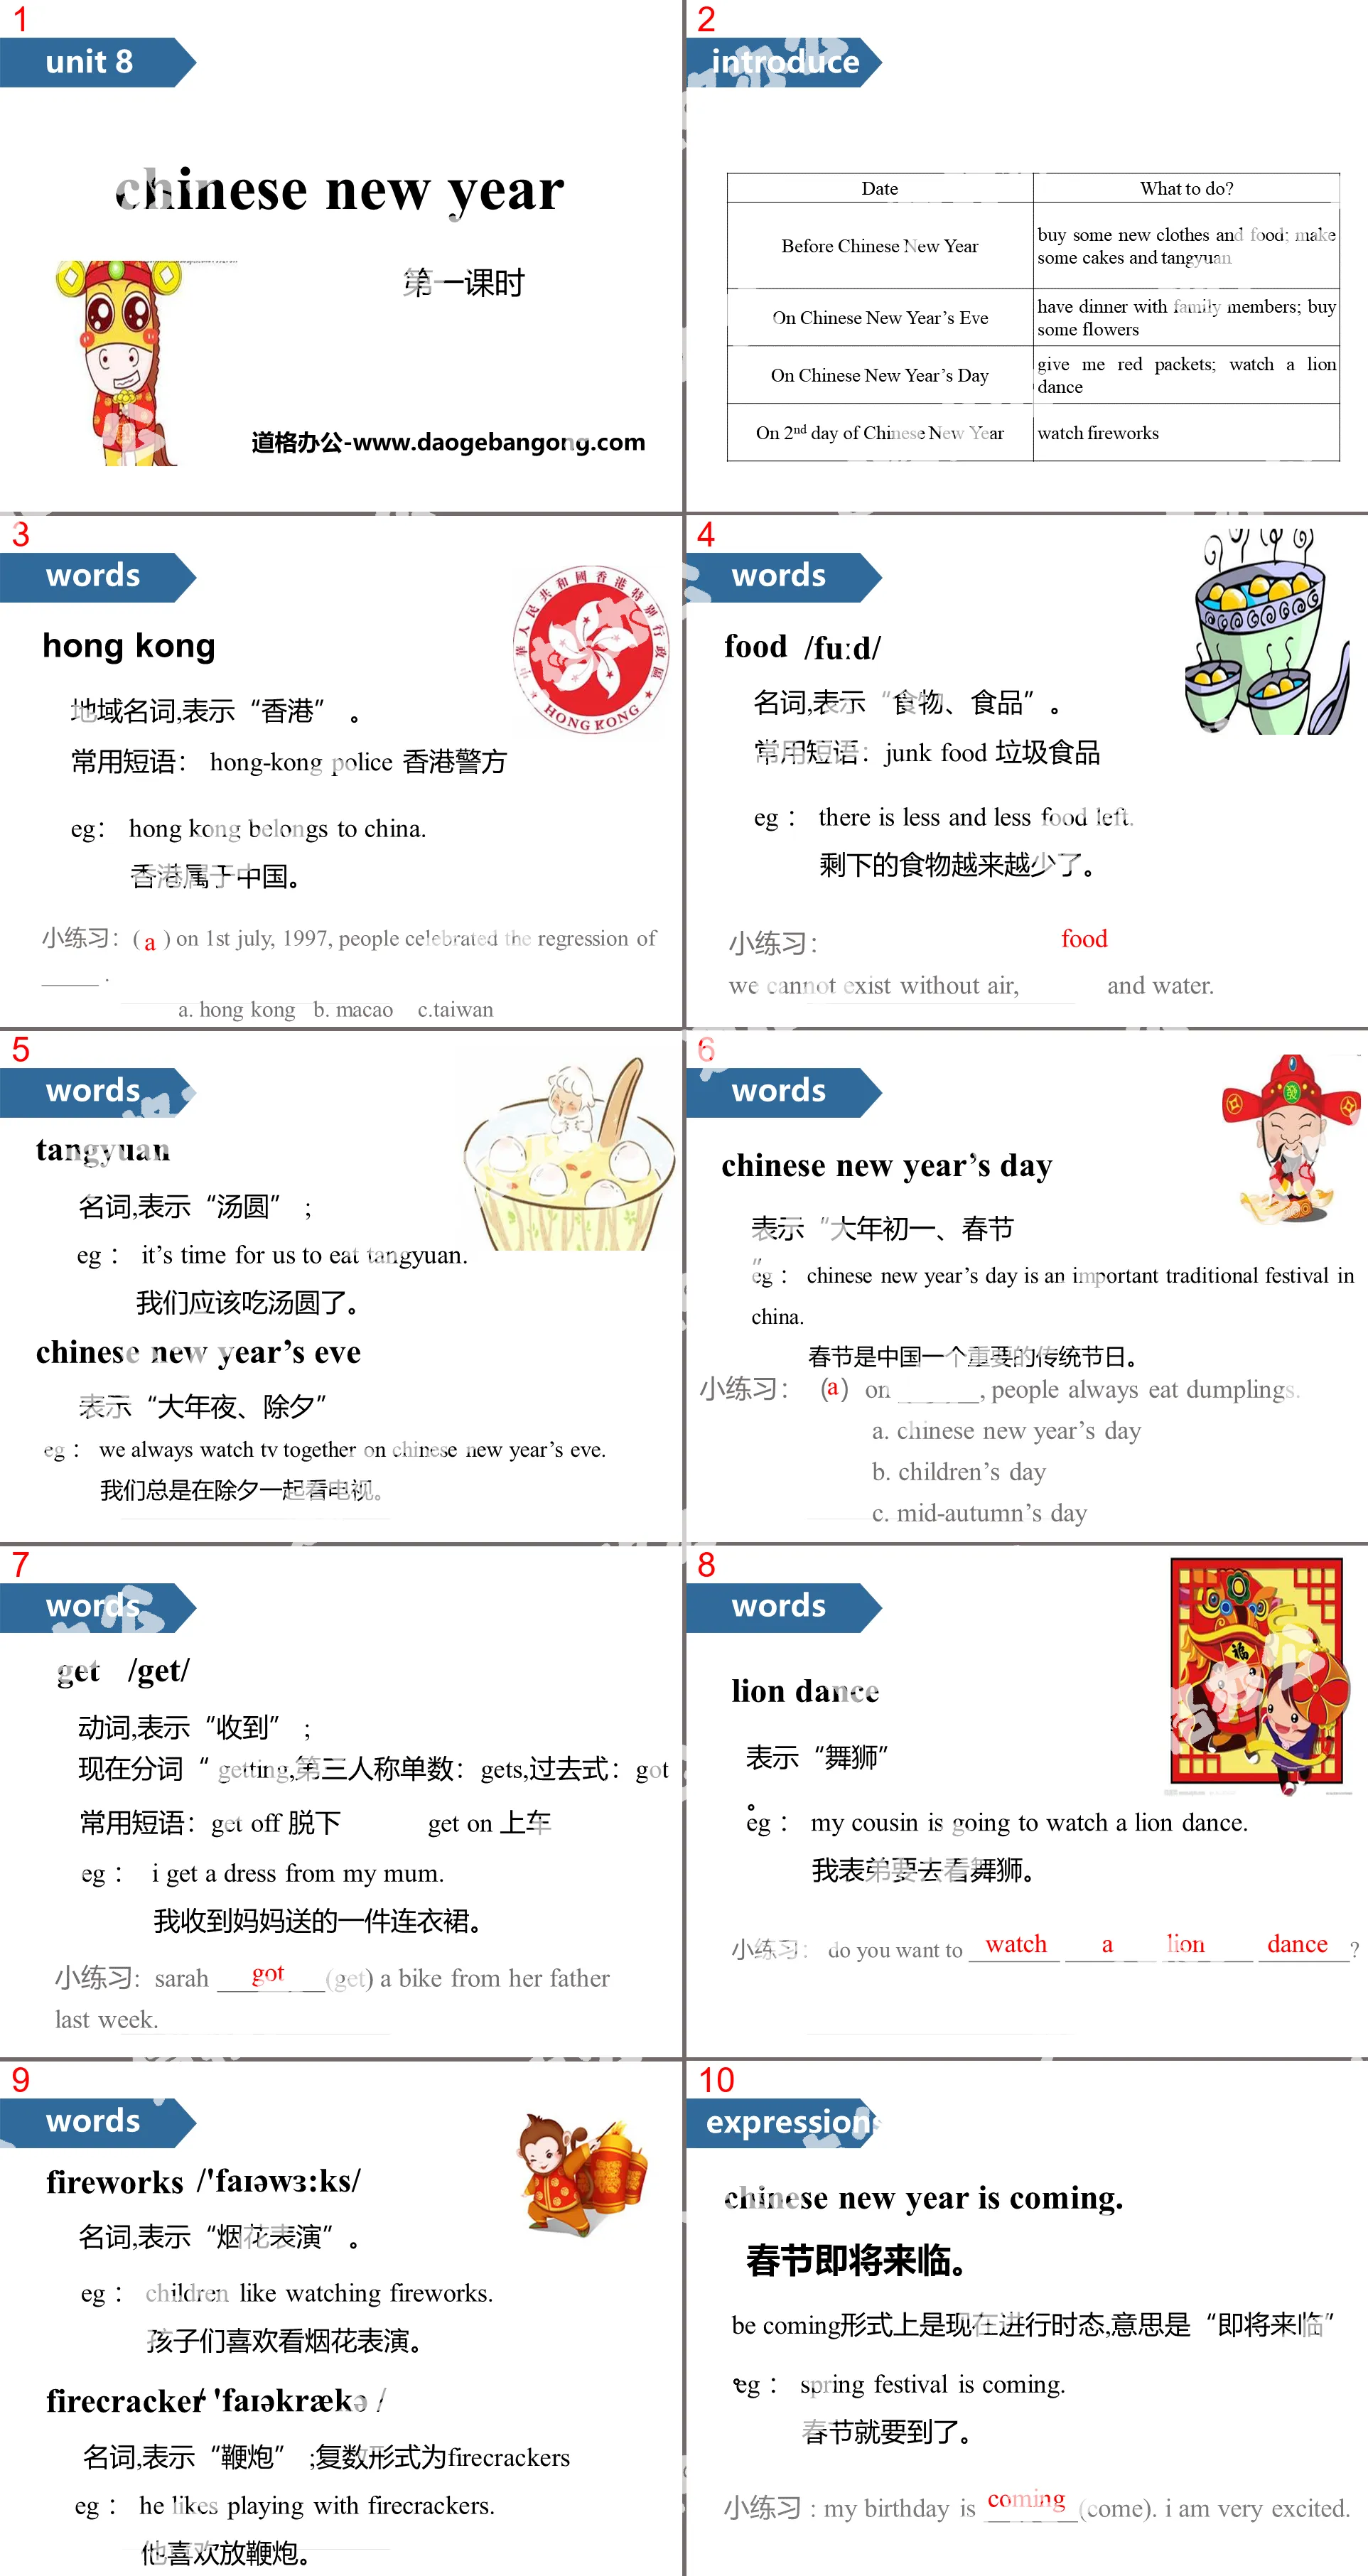 《Chinese New Year》PPT(第一课时)
